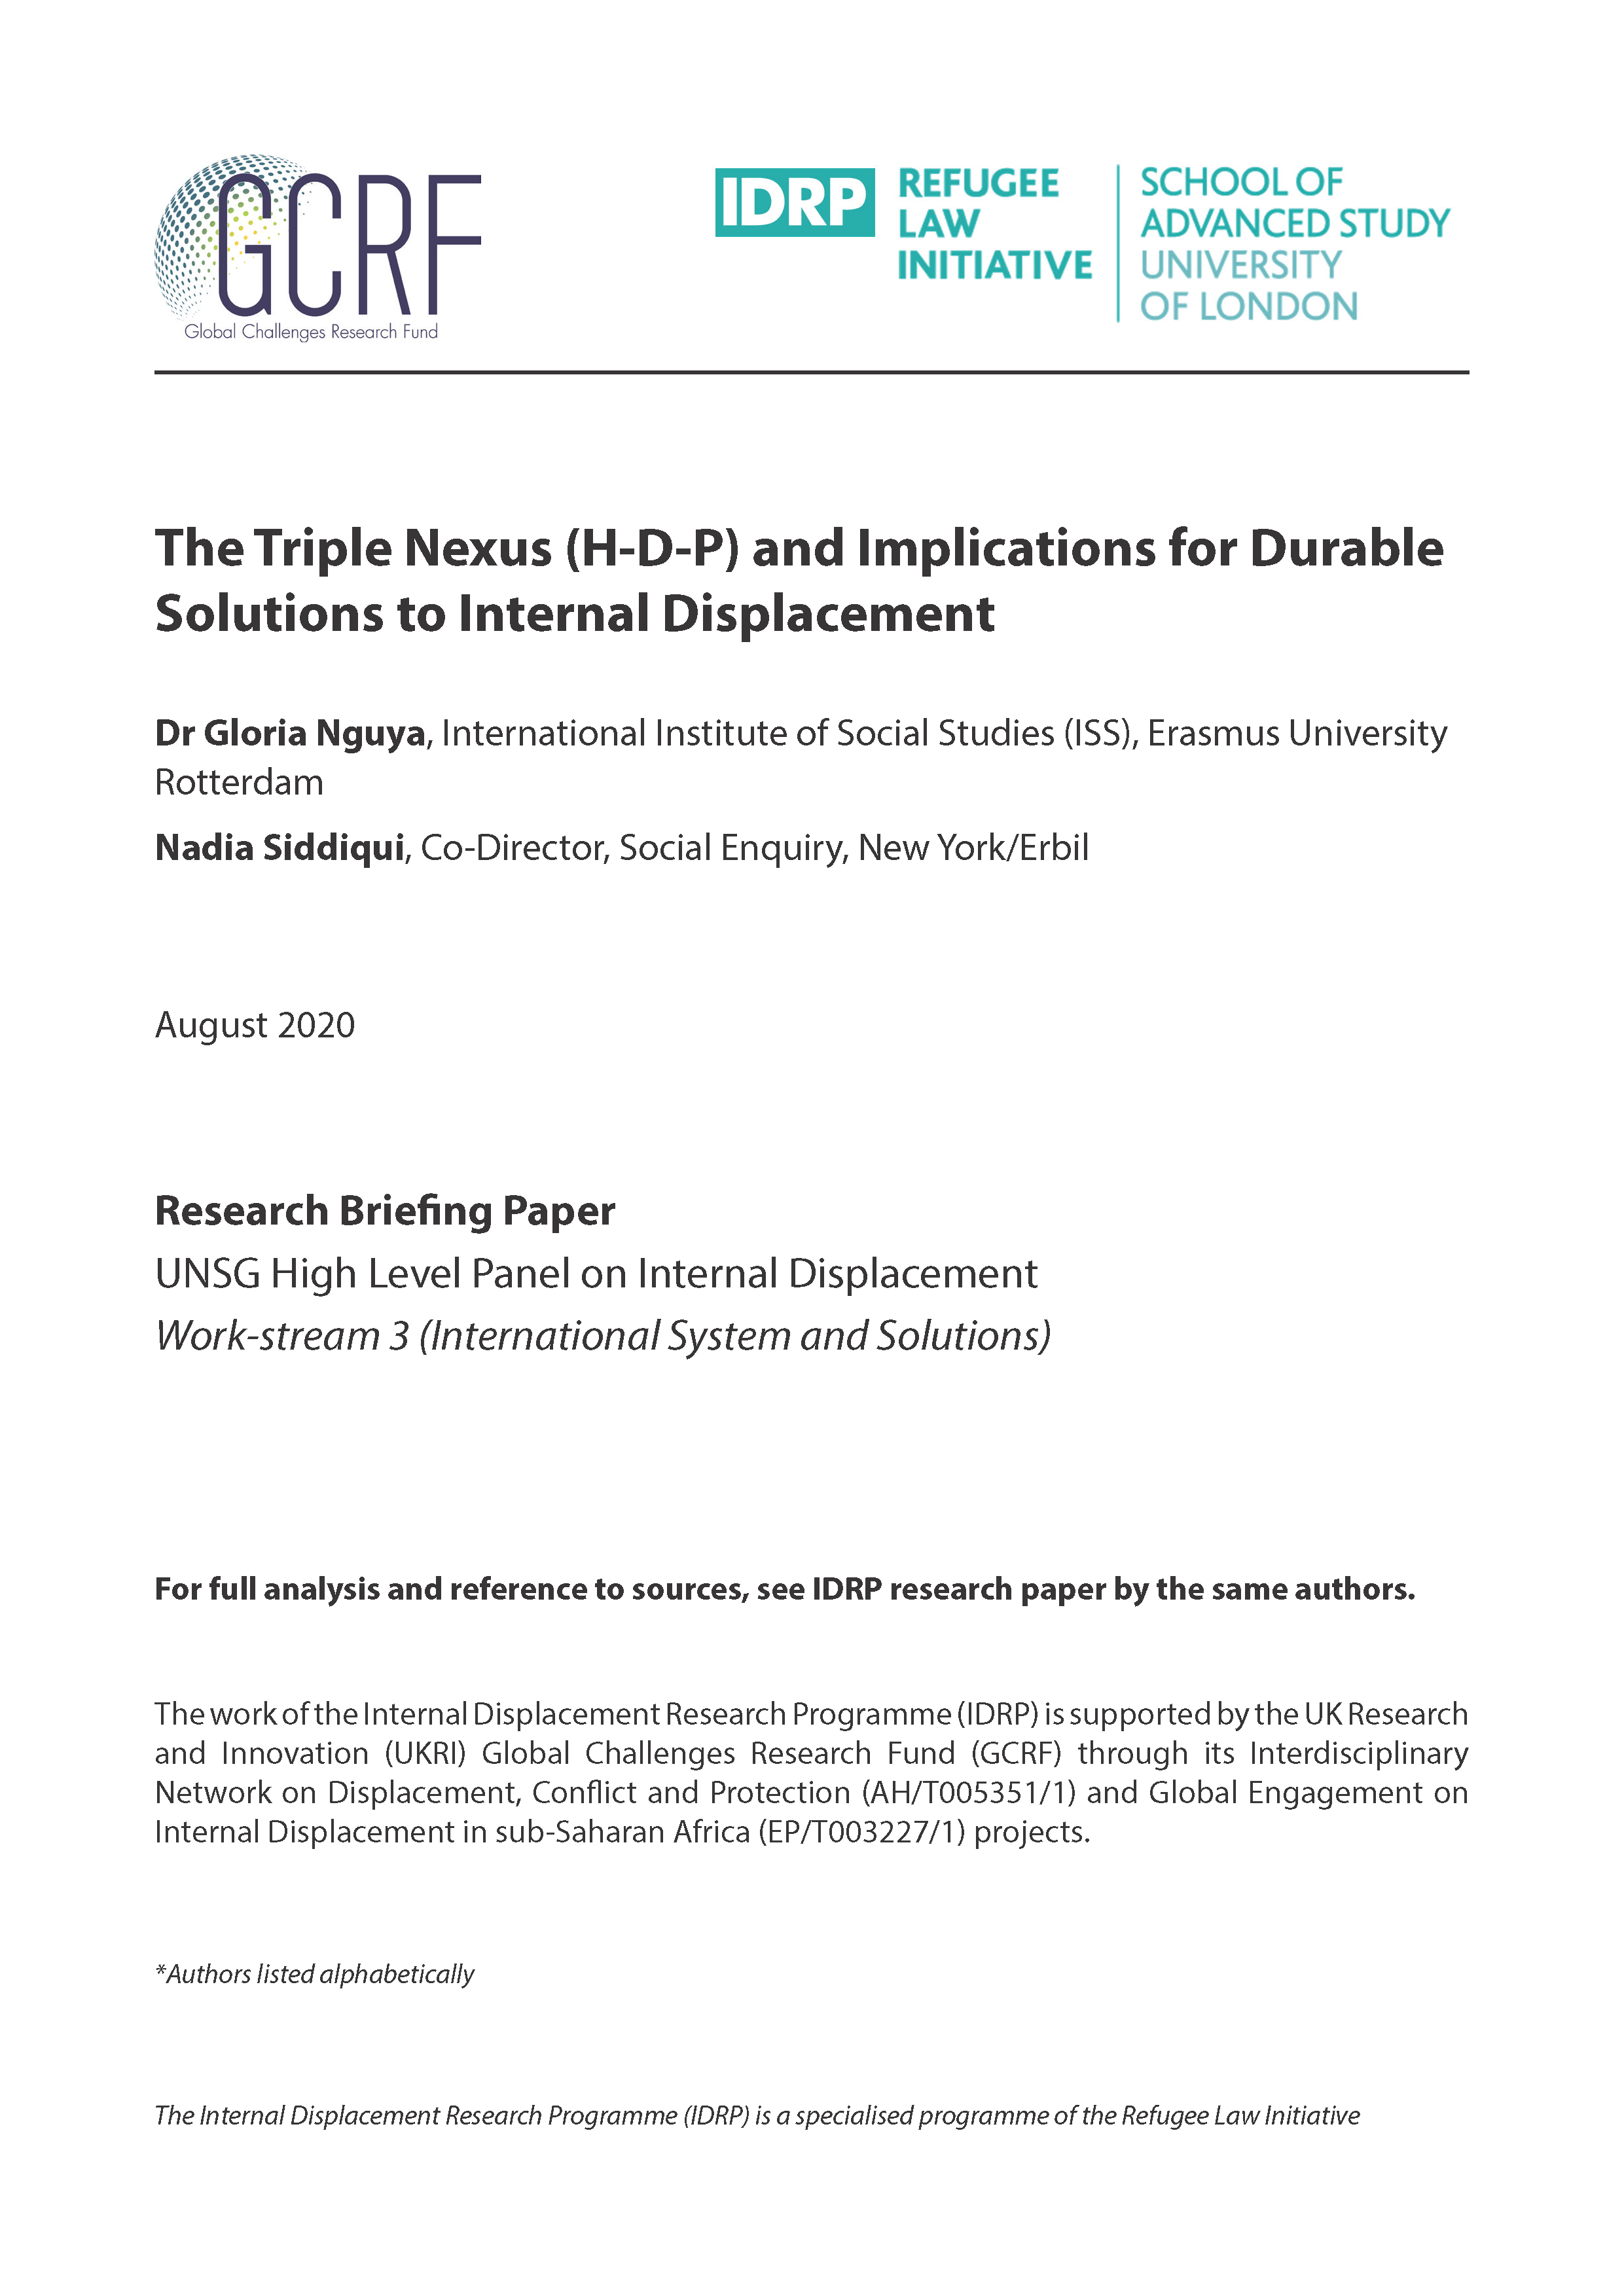 Cover page for The Triple Nexus (HDP) and Implications for Durable Solutions to Internal Displacement 